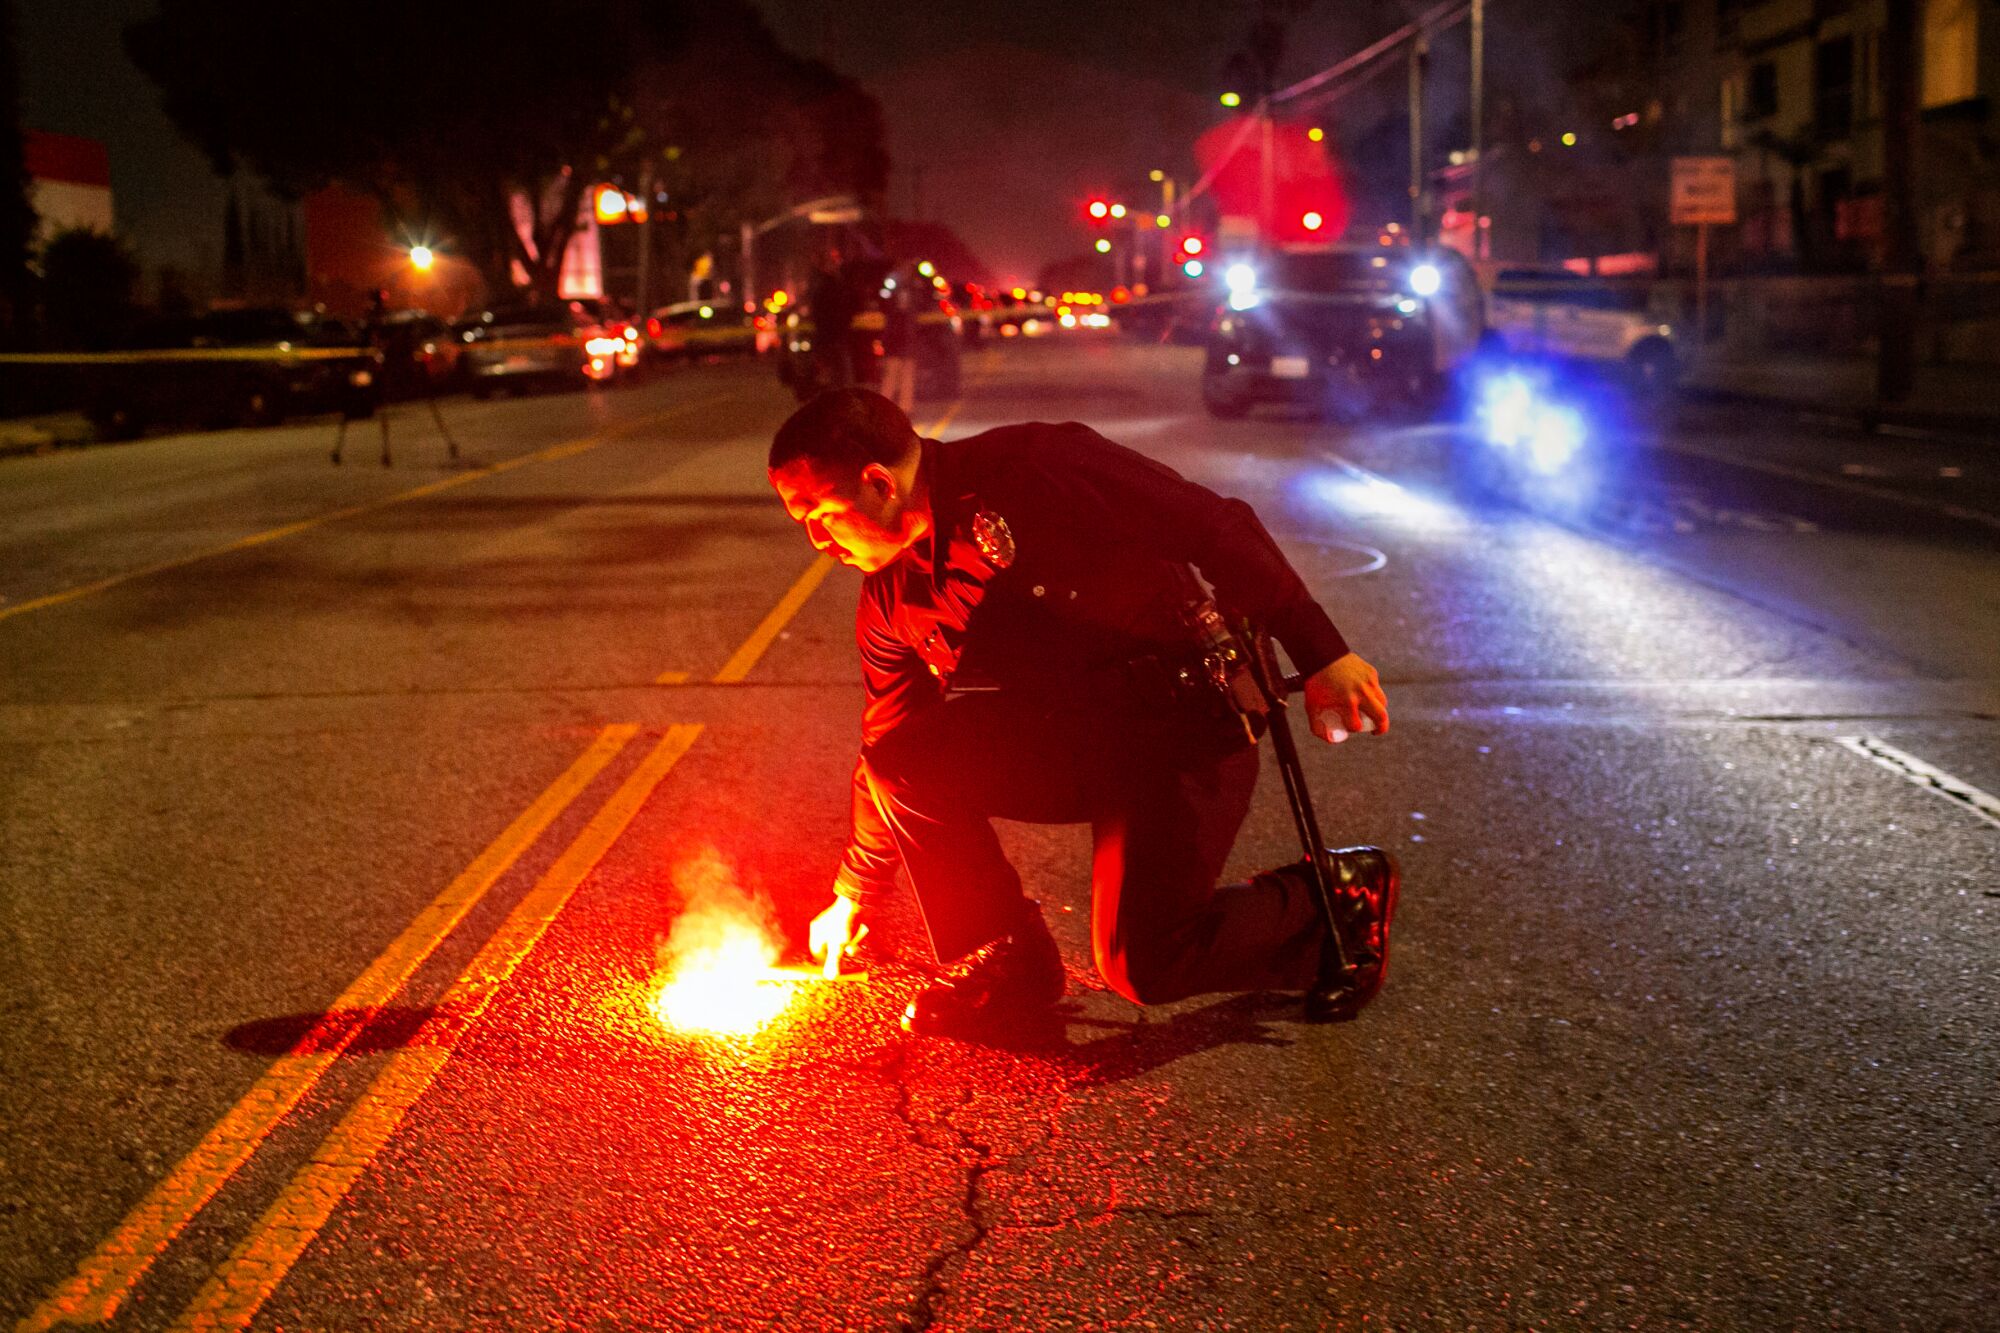 An LAPD officer launches a red flare in the middle of a road